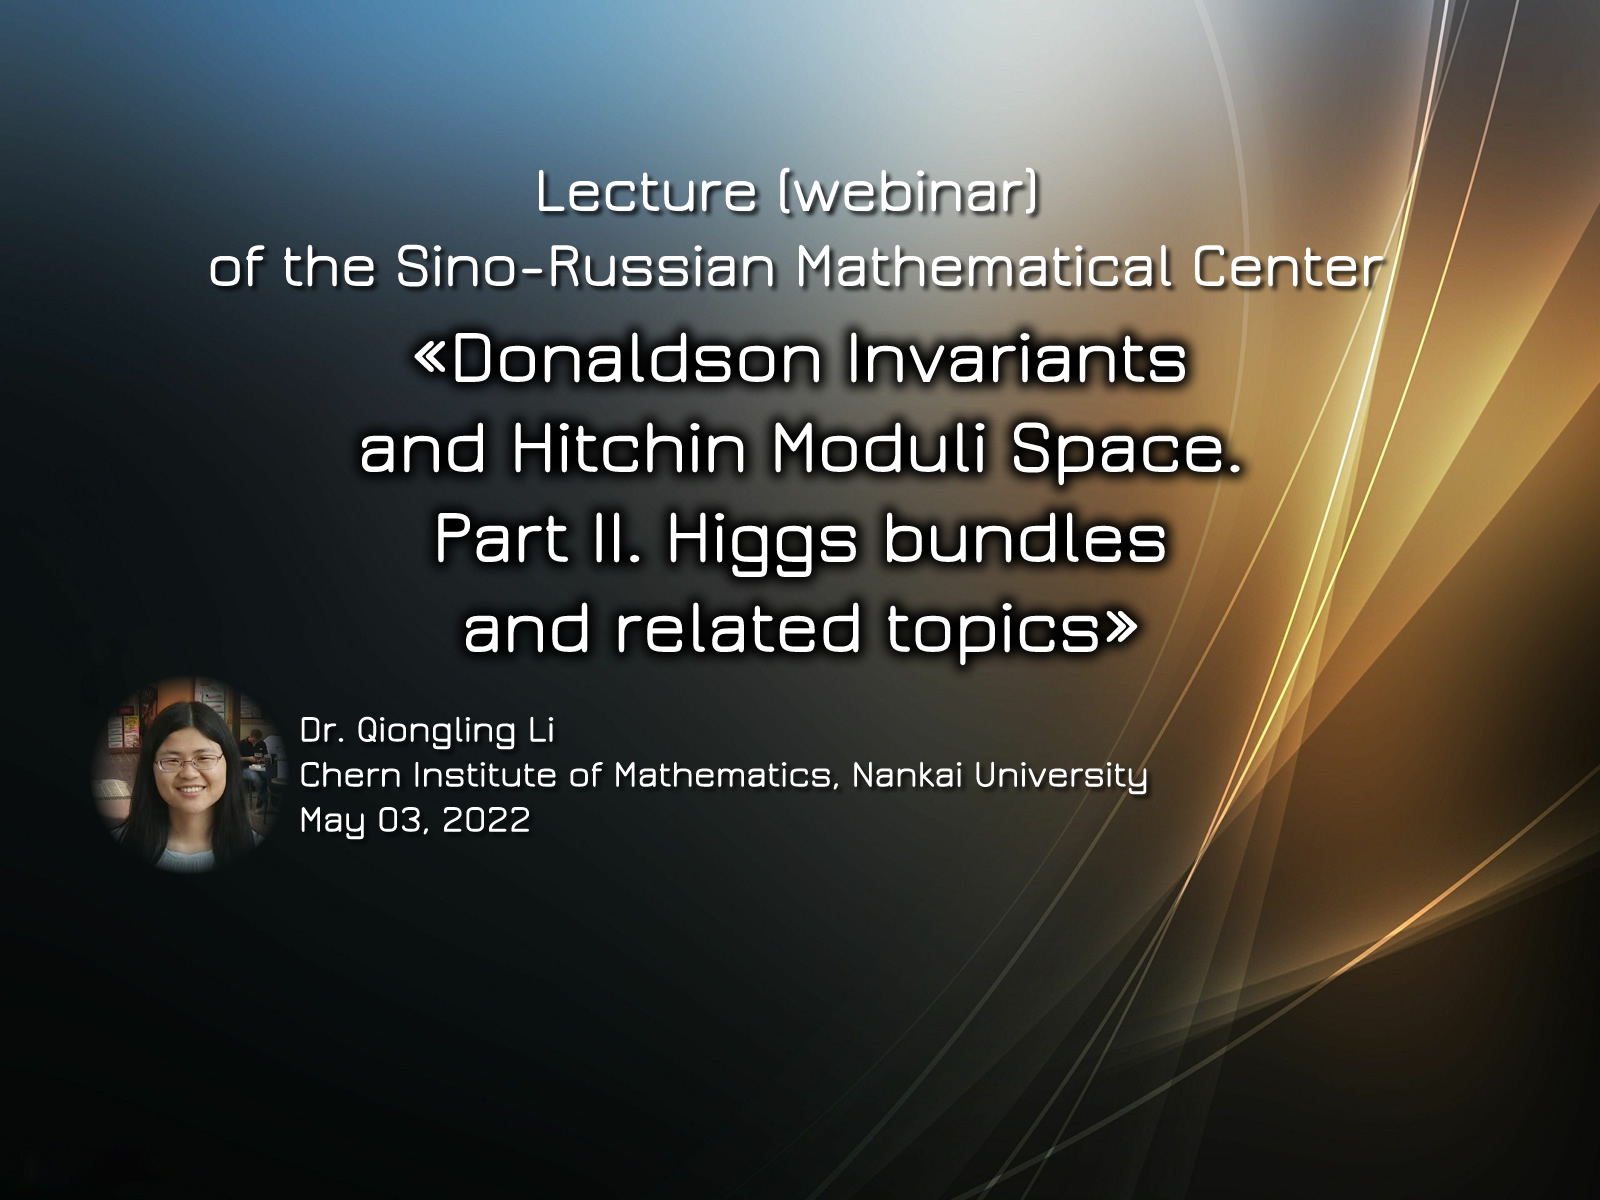 «Higgs bundles and related topics» 03.05.2022